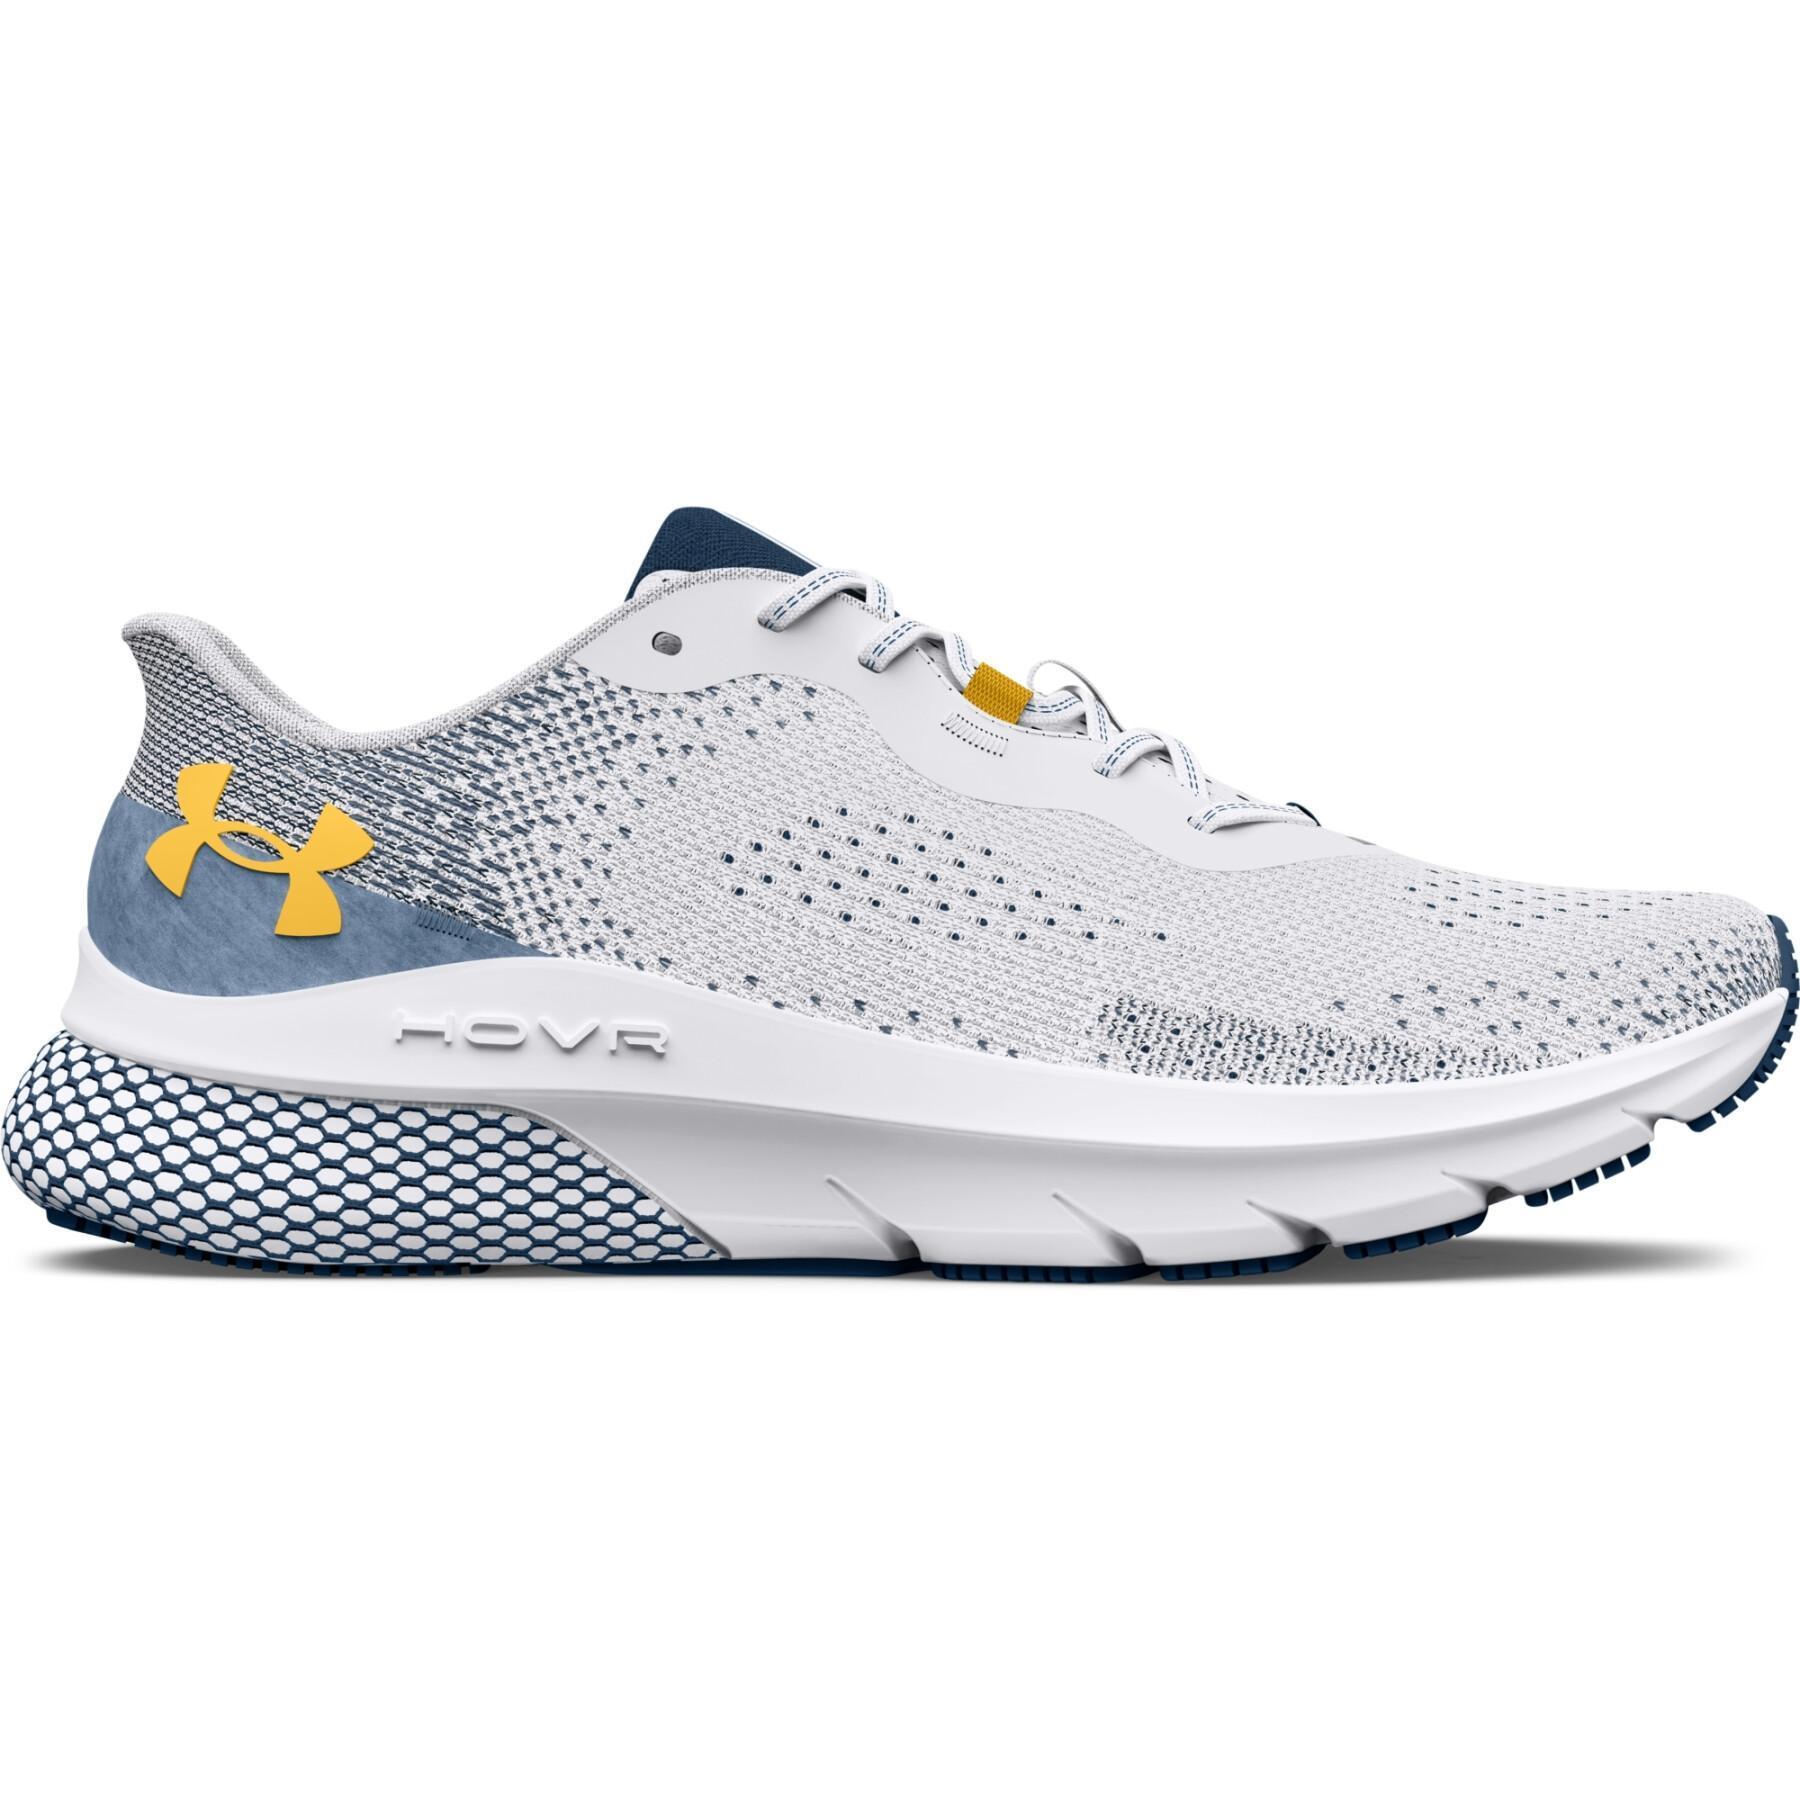 Running shoes Under Armour Hovr Turbulence 2